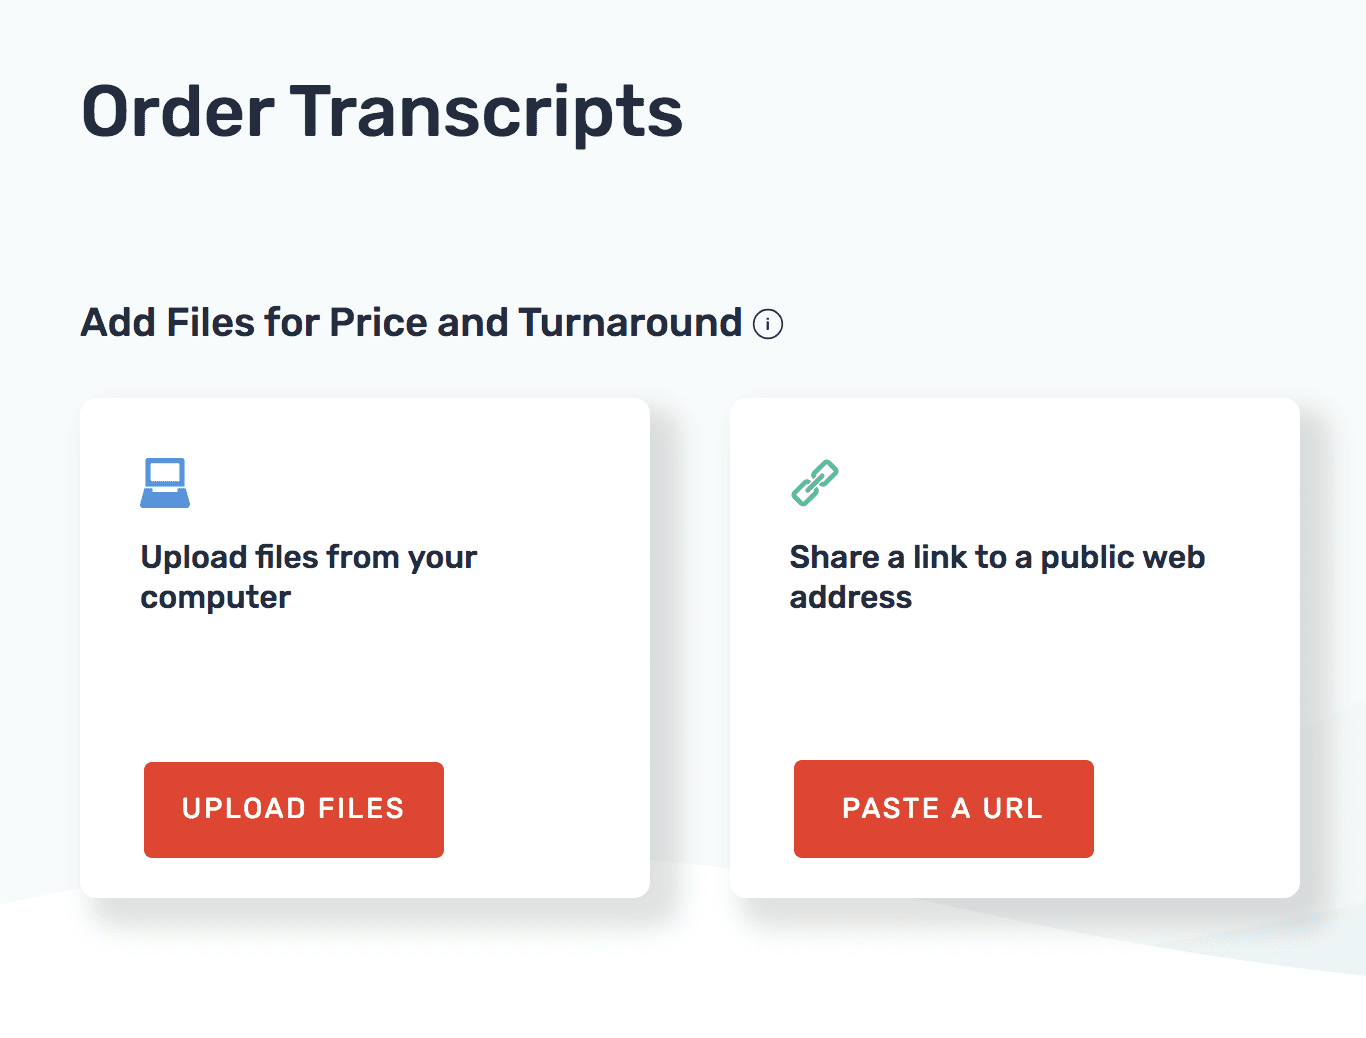 Text reading "Add files for price and turnaround" plus buttons to upload files for Rev transcription